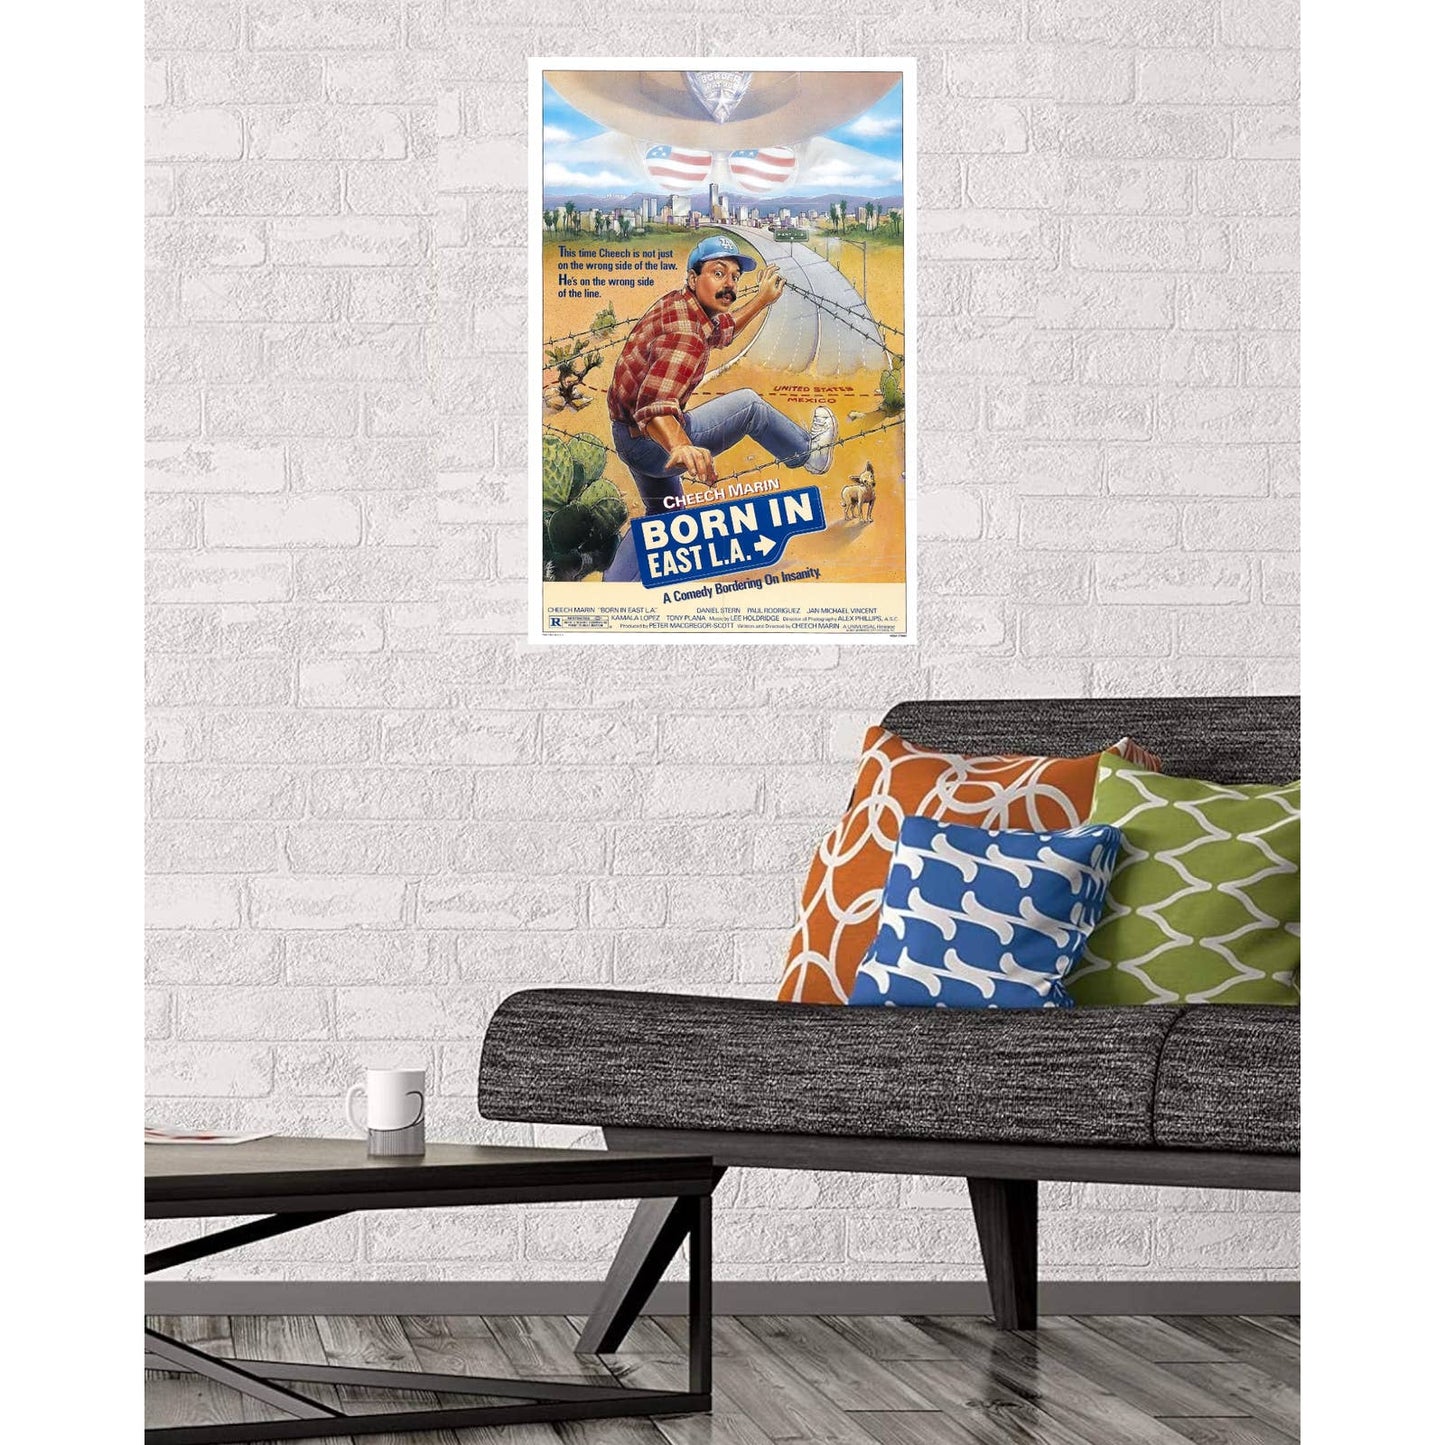 Born In East L.A. Movie Poster Print Wall Art 16"x24"